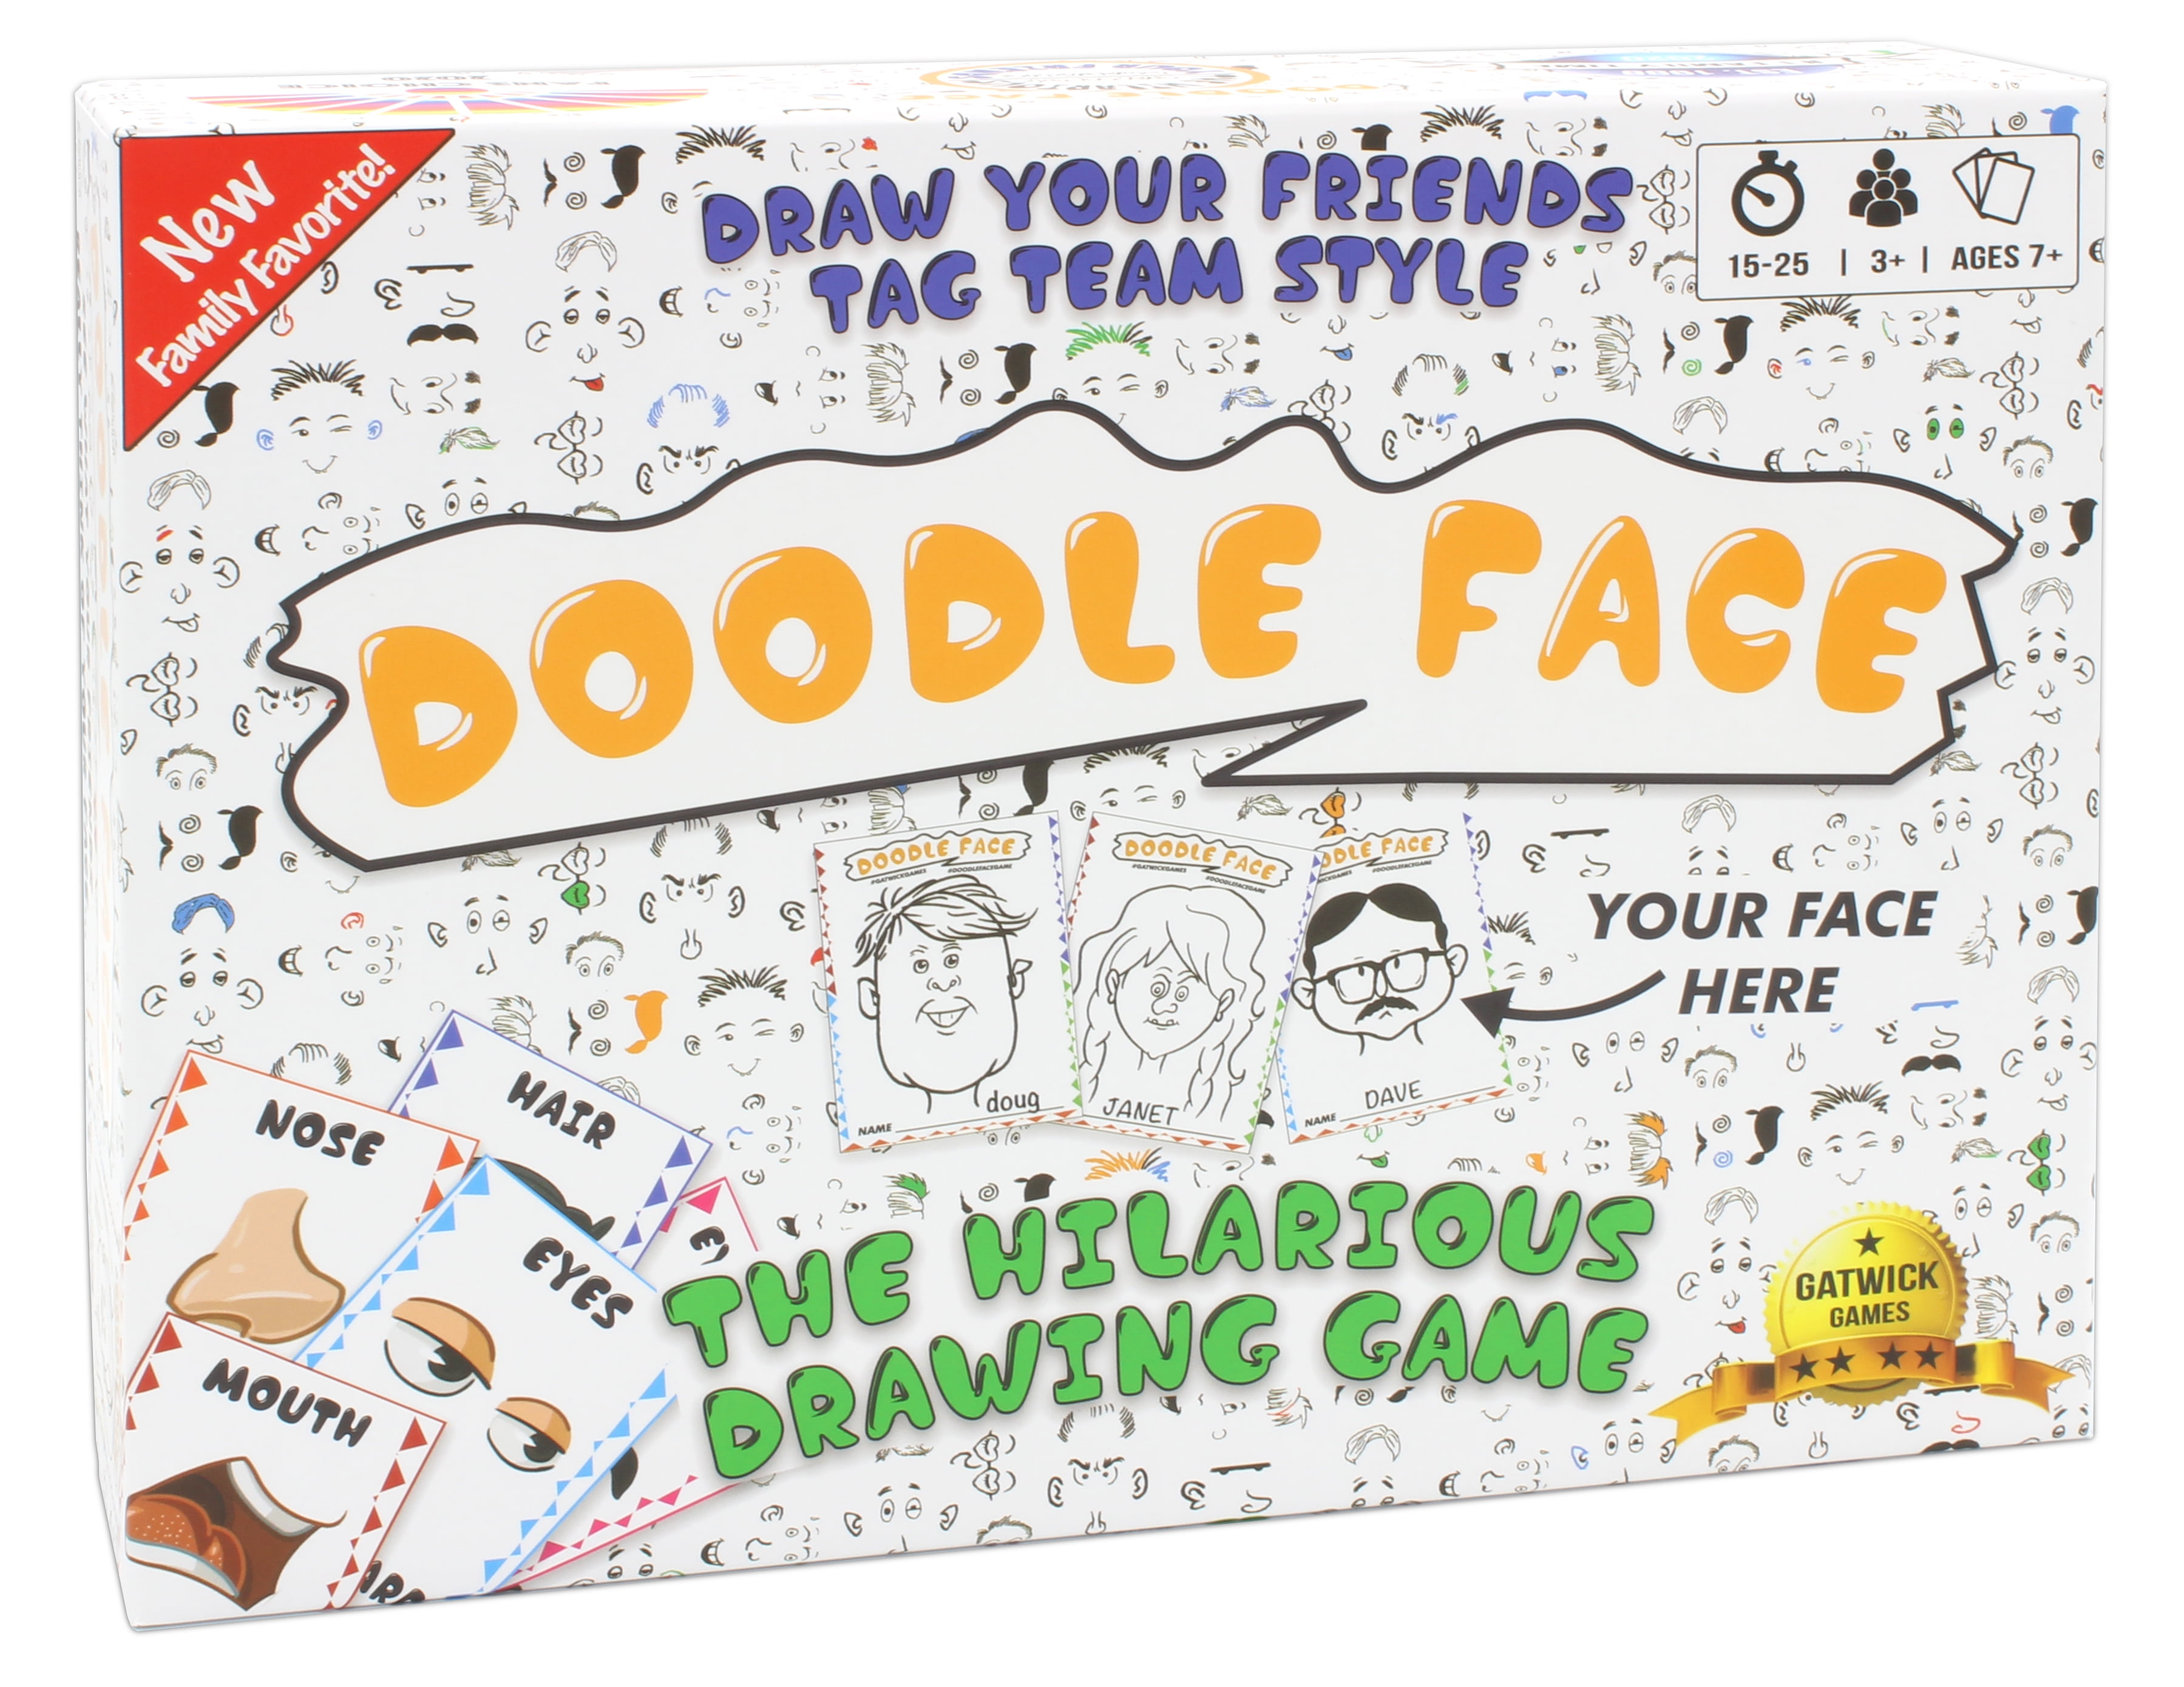 Stay at Home Date Night Party Game for 3-20 Players Doodle Face Game New Hilarious Game of Drawing Your Friends and Family A Drawing Game for Families Fun for All Ages and Skill Levels 